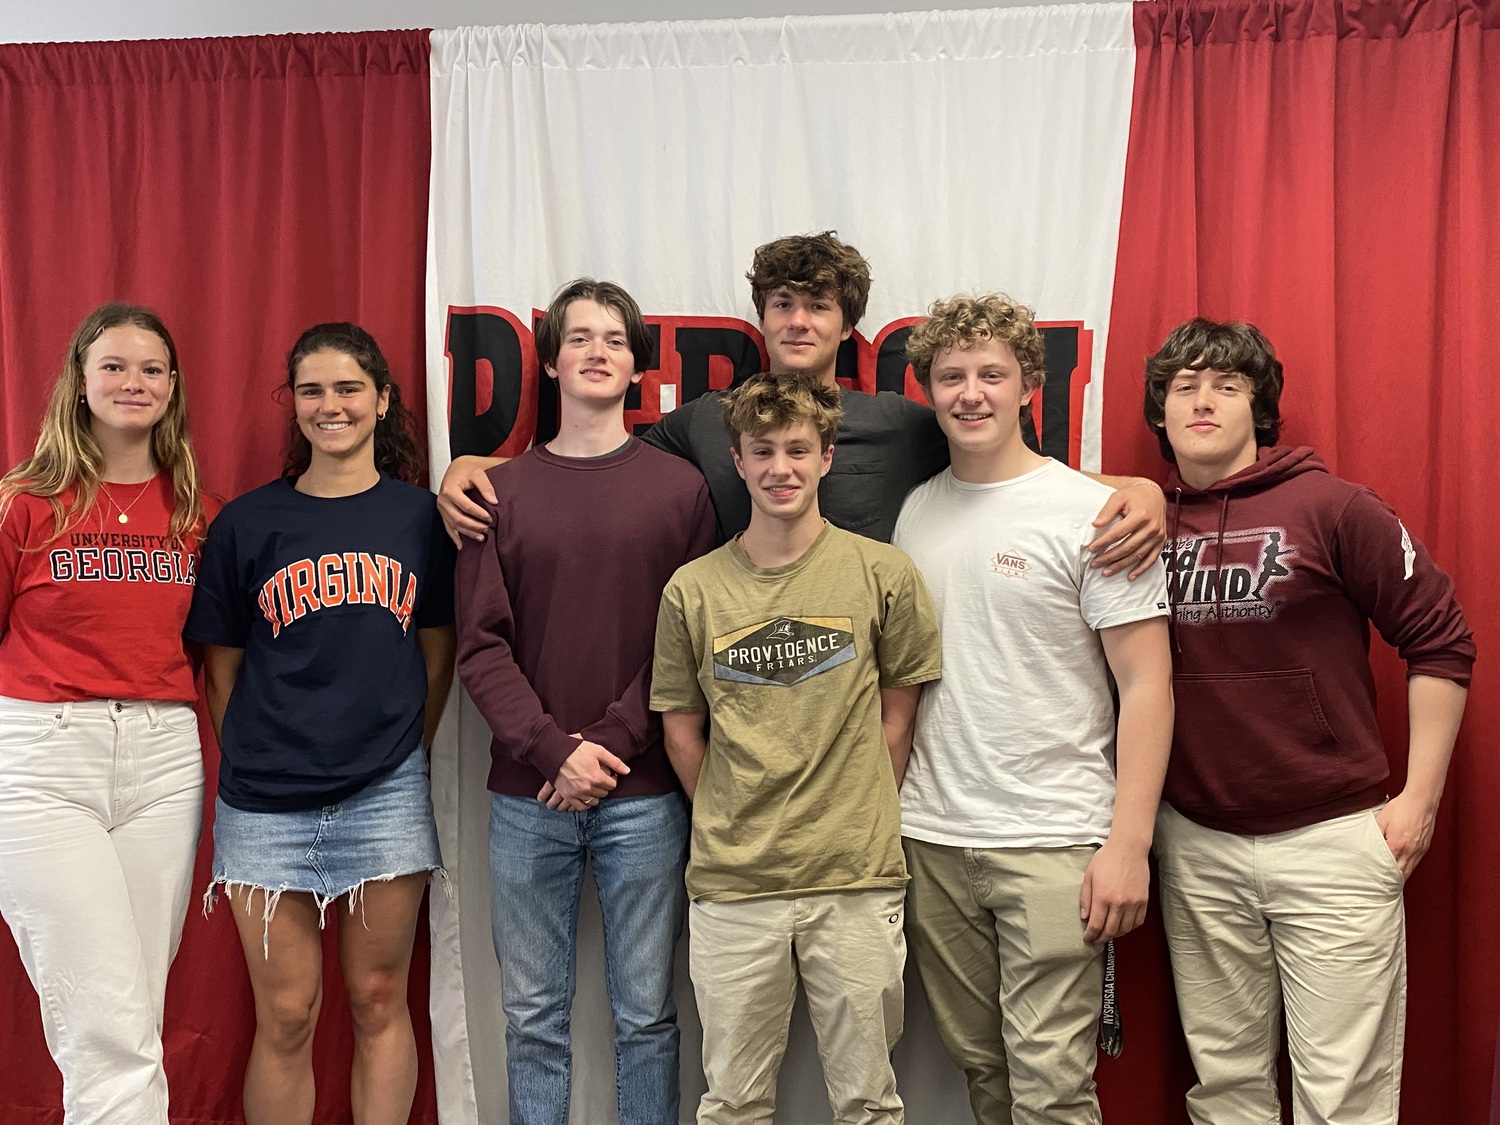 Pierson Middle/High School seniors wore the colors or logos of the college choice to school on May 1.  All seniors were invited to the counseling office to formally announce their plans such as college, career training, employment or armed services. COURTESY SAG HARBOR SCHOOL DISTIRCT